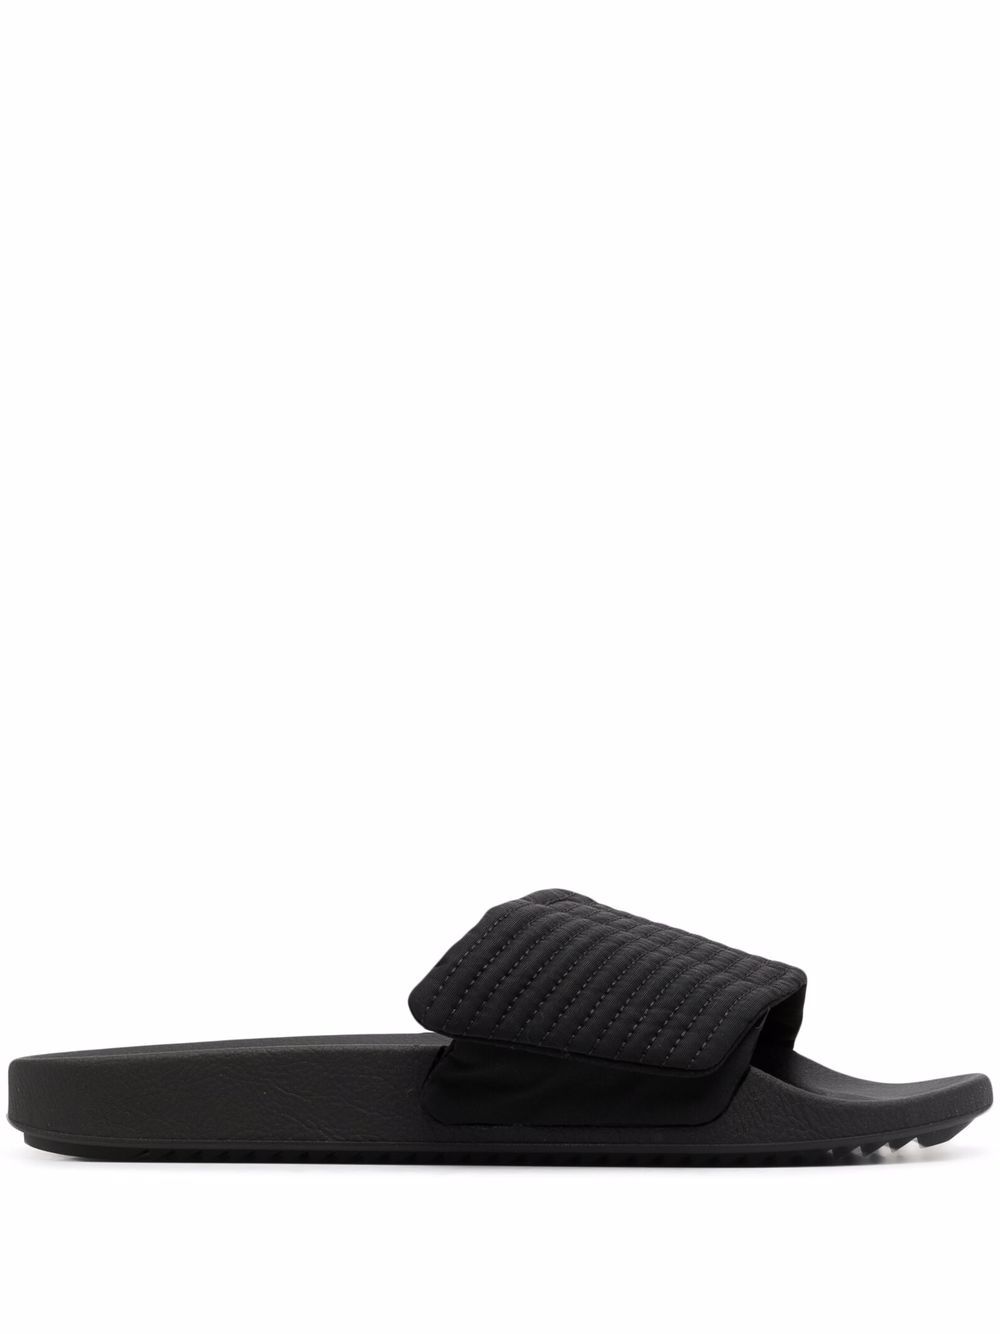 Rick Owens DRKSHDW canvas touch-strap piped slides